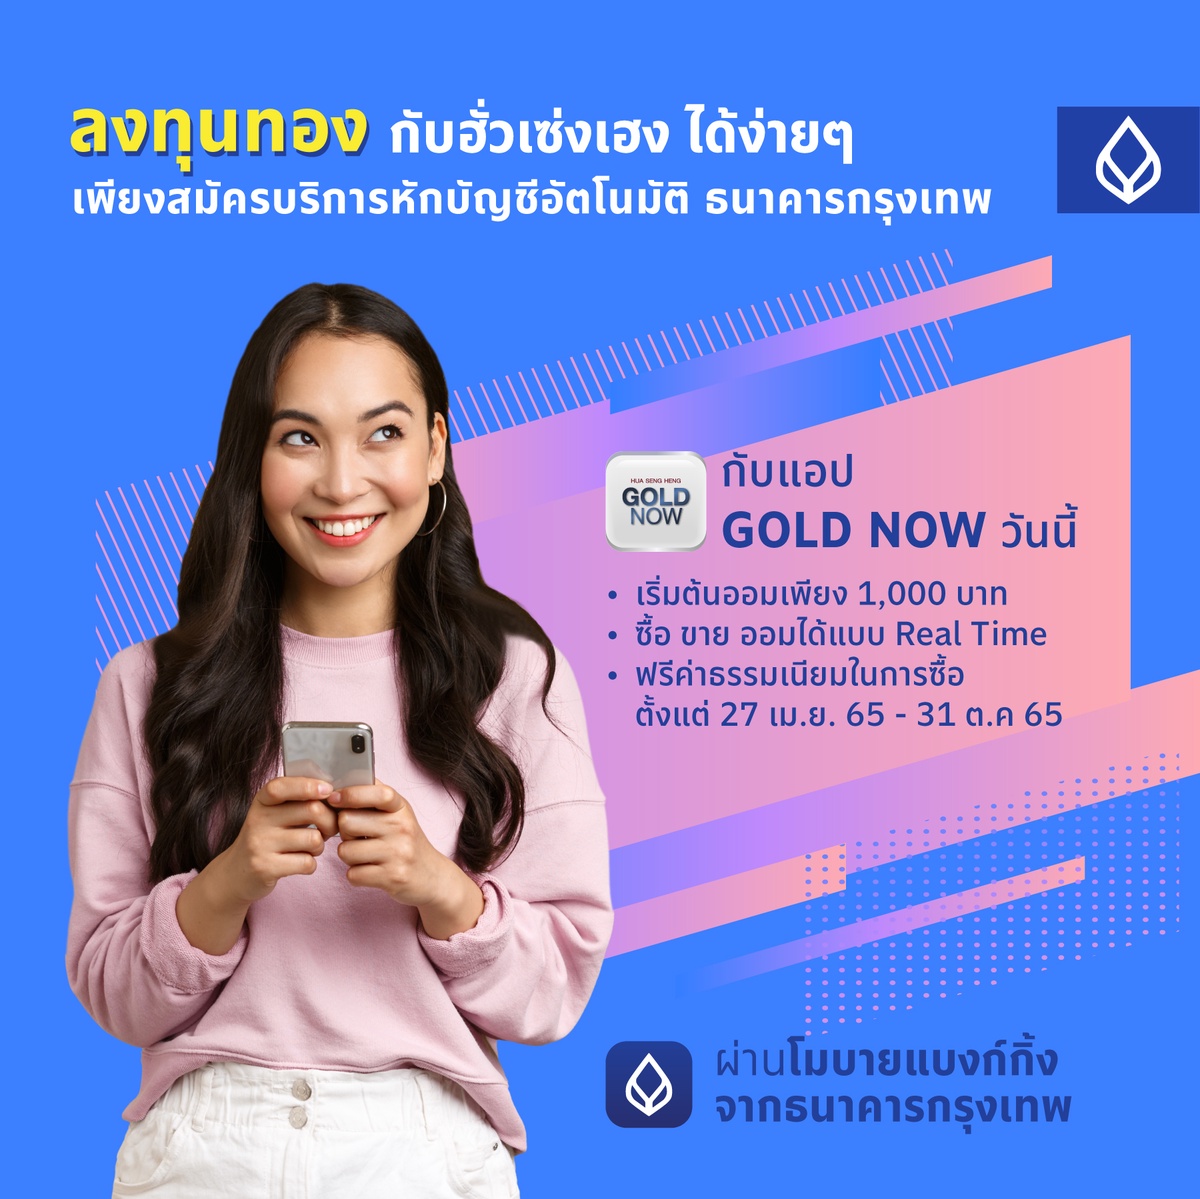 Bangkok Bank joins Hua Seng Heng to invite young generations to save gold by opening an online account via the GOLD NOW app